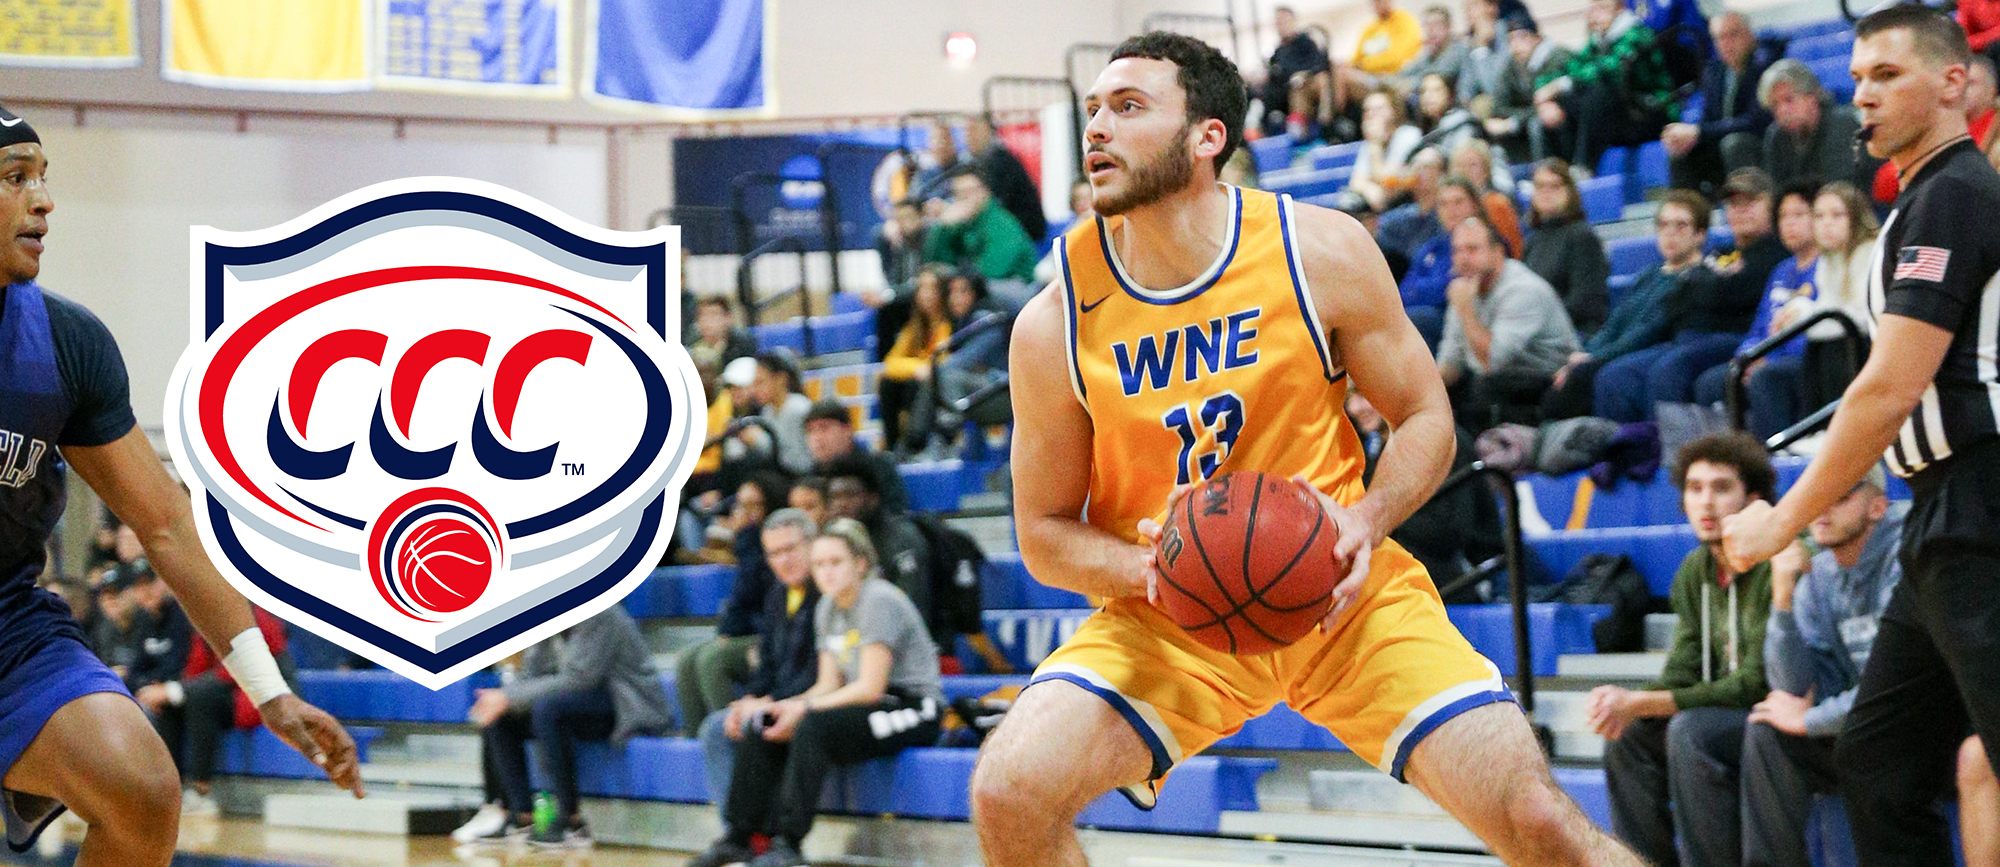 Alex Sikorski Earns First Career CCC Player of the Week Award